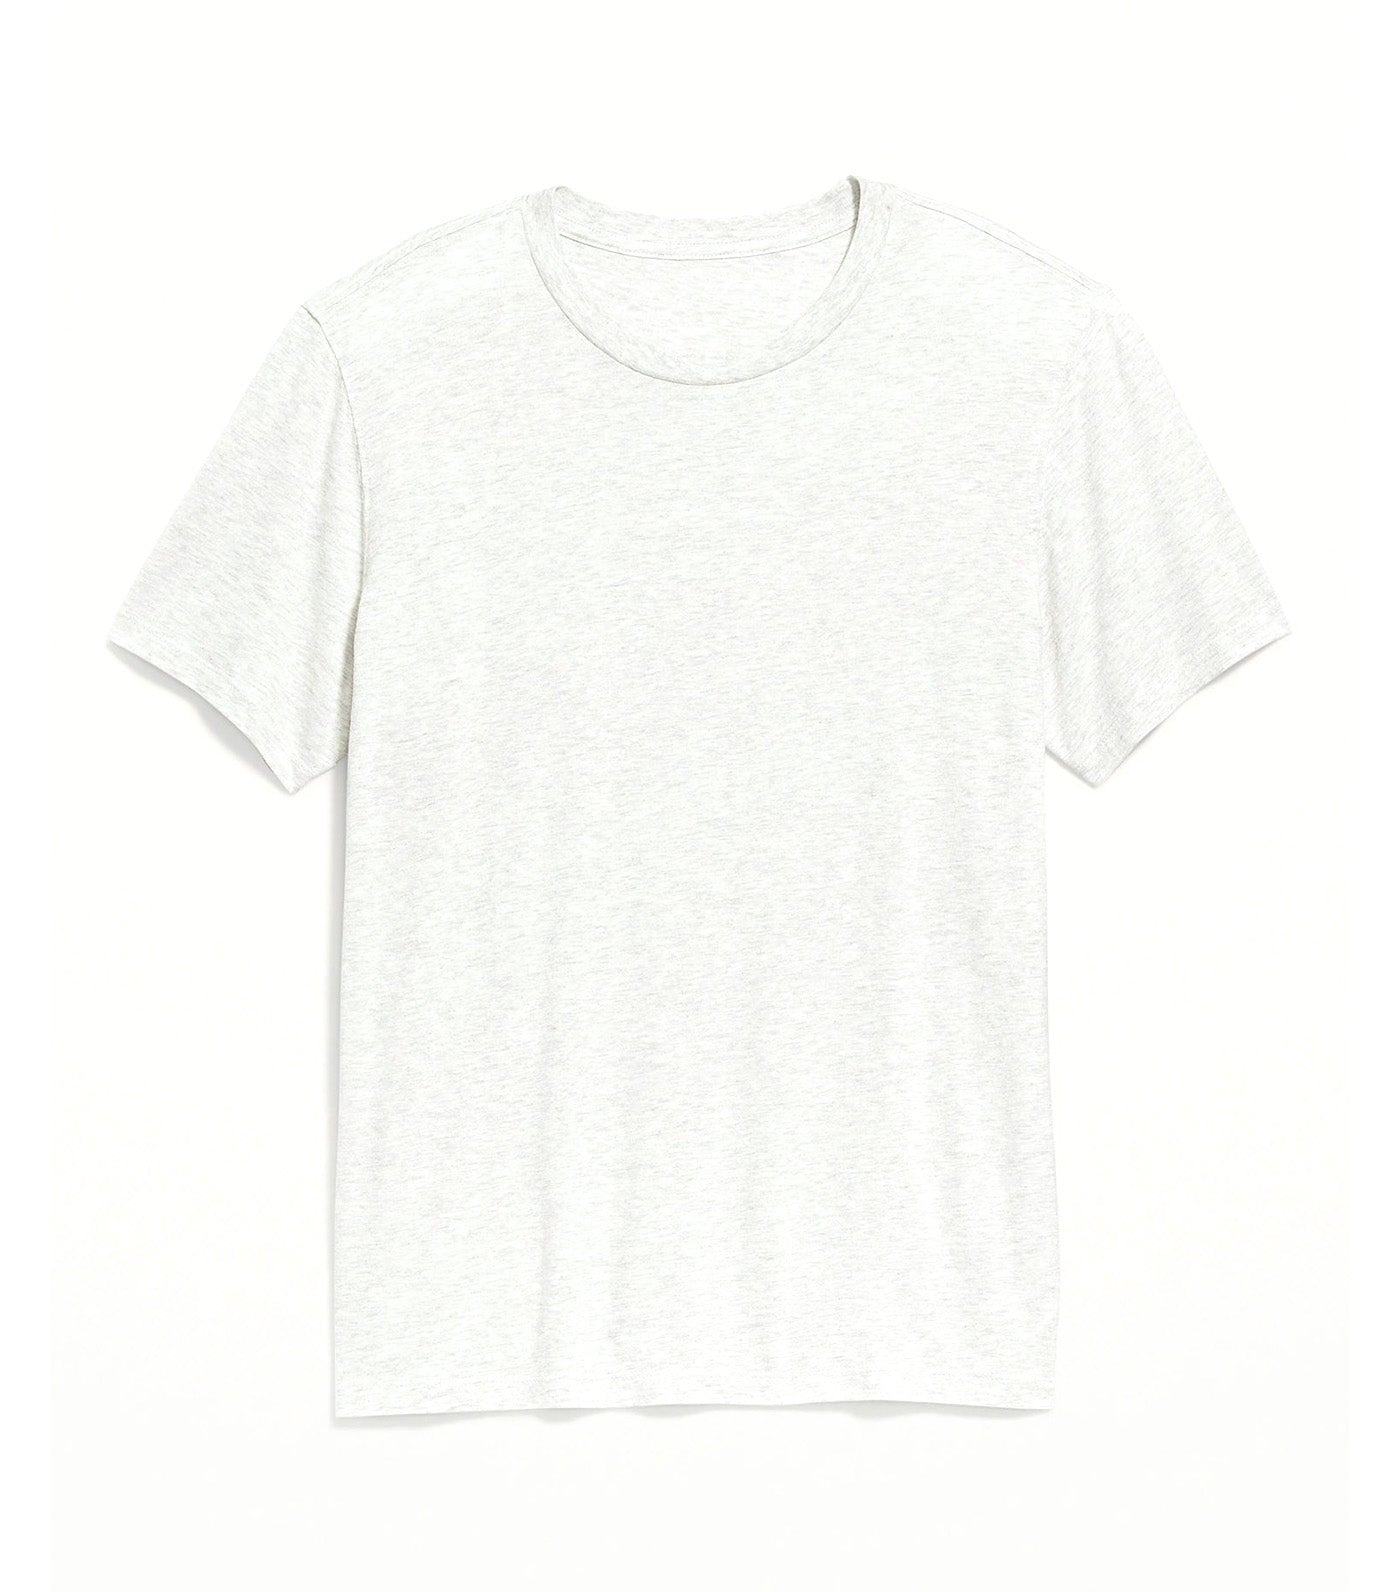 Soft-Washed Crew-Neck T-Shirt for Men Oatmeal Heather